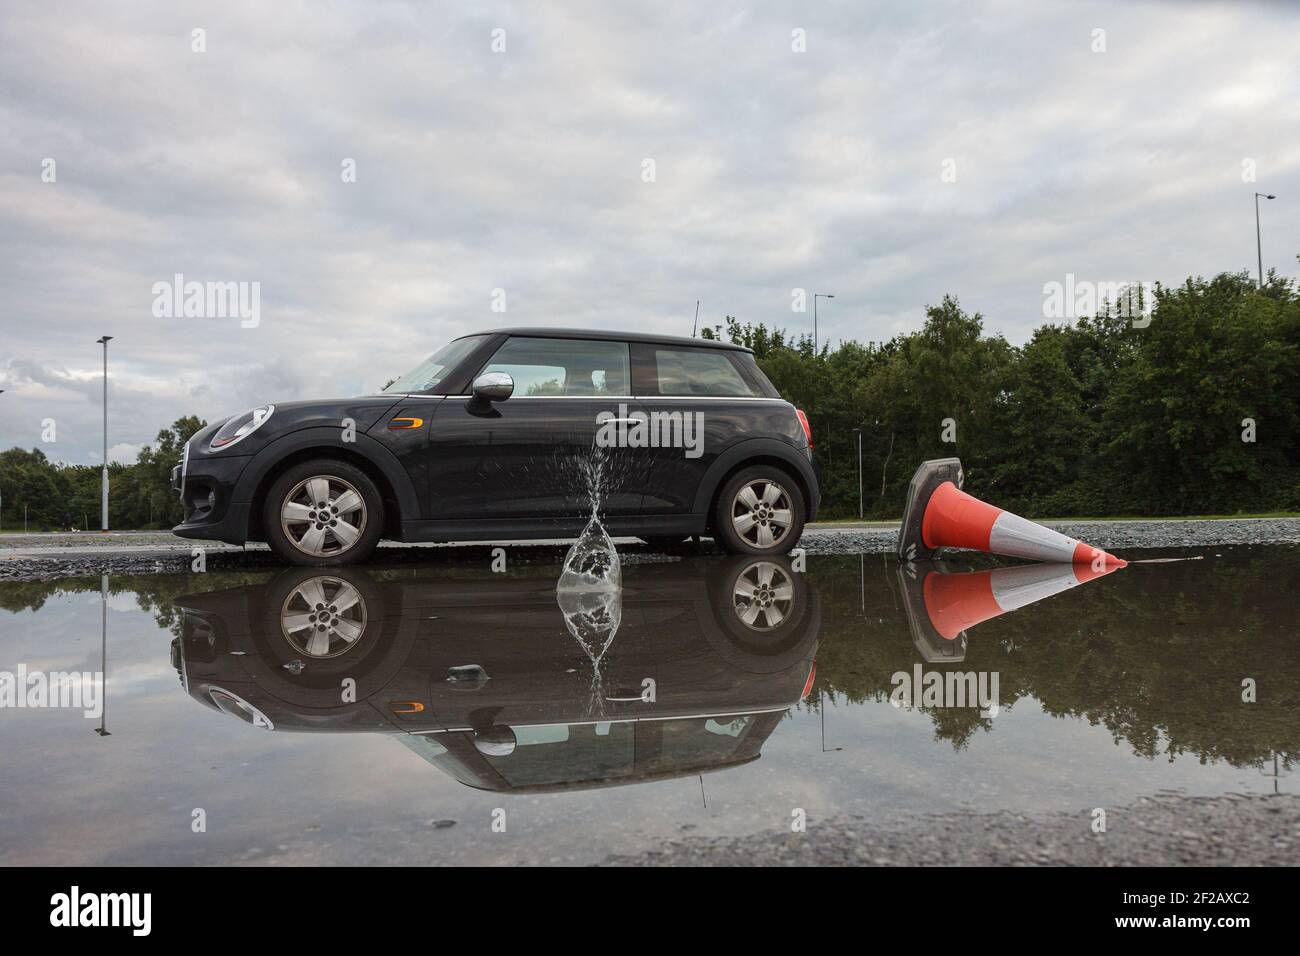 Mini Cooper & Overturned Road Cone in the Puddle, car reflection in water, cloudy sky, green trees in the background, plus overturned traffic cone Stock Photo